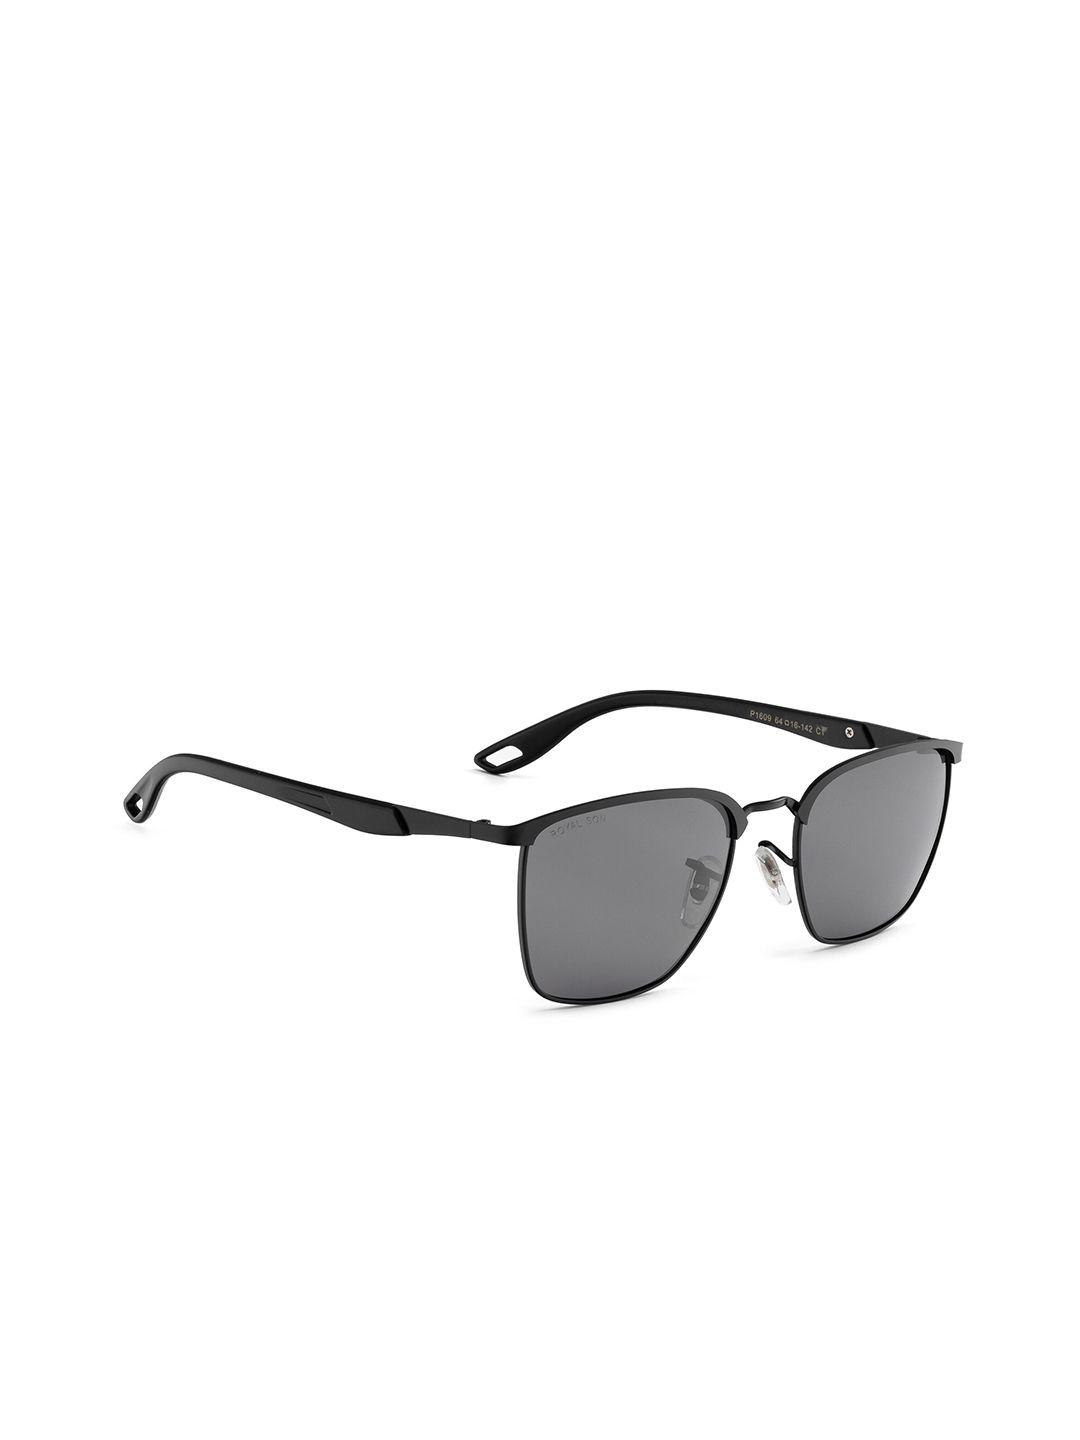 royal son men square sunglasses with polarised and uv protected lens chi00131-c1